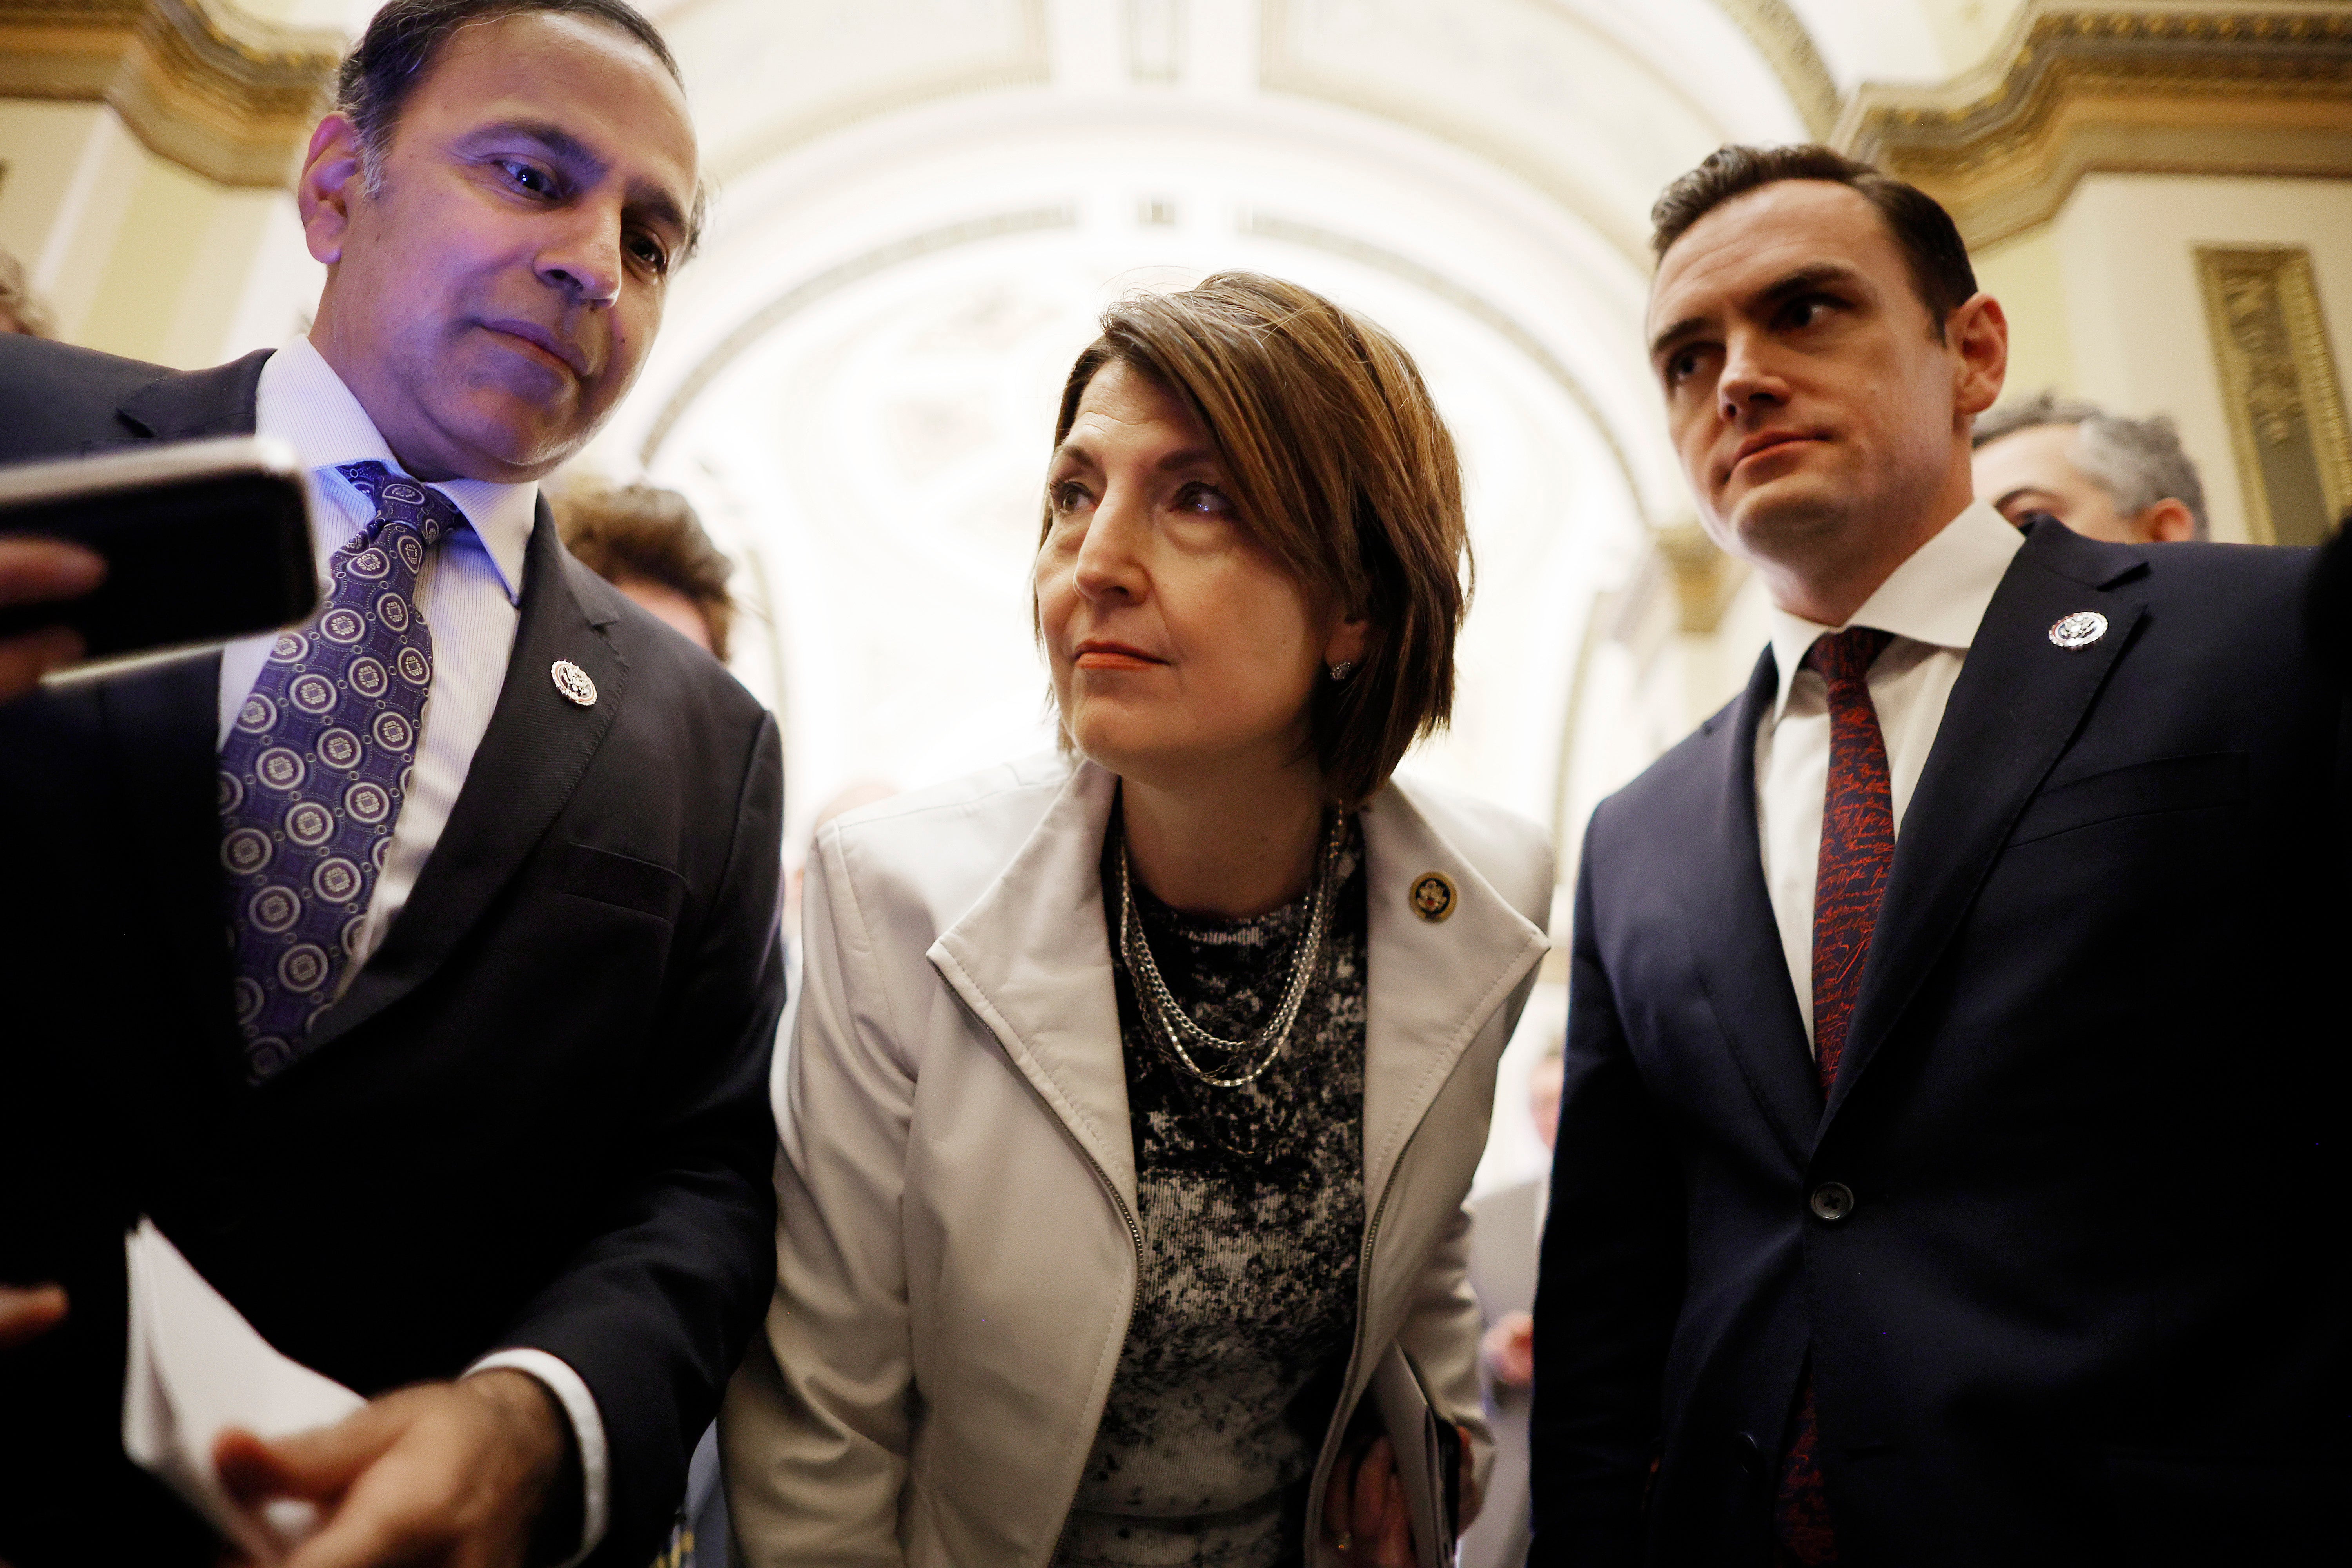 WASHINGTON, DC - MARCH 13: (L-R) Rep. Raja Krishnamoorthi (D-IL), House Energy and Commerce Committee Chair Cathy McMorris Rodgers (R-WA) and Rep. Mike Gallager (D-WI) talk with reporters after the House of Representative’s voted on legislation they co-sponsored to ban TikTok at the U.S. Capitol on March 13, 2024 in Washington, DC. The House of Representatives voted Wednesday to ban TikTok in the United States due to concerns over personal privacy and national security unless the Chinese-owned parent company ByteDance sells the popular video app within the next six months. (Photo by Chip Somodevilla/Getty Images)